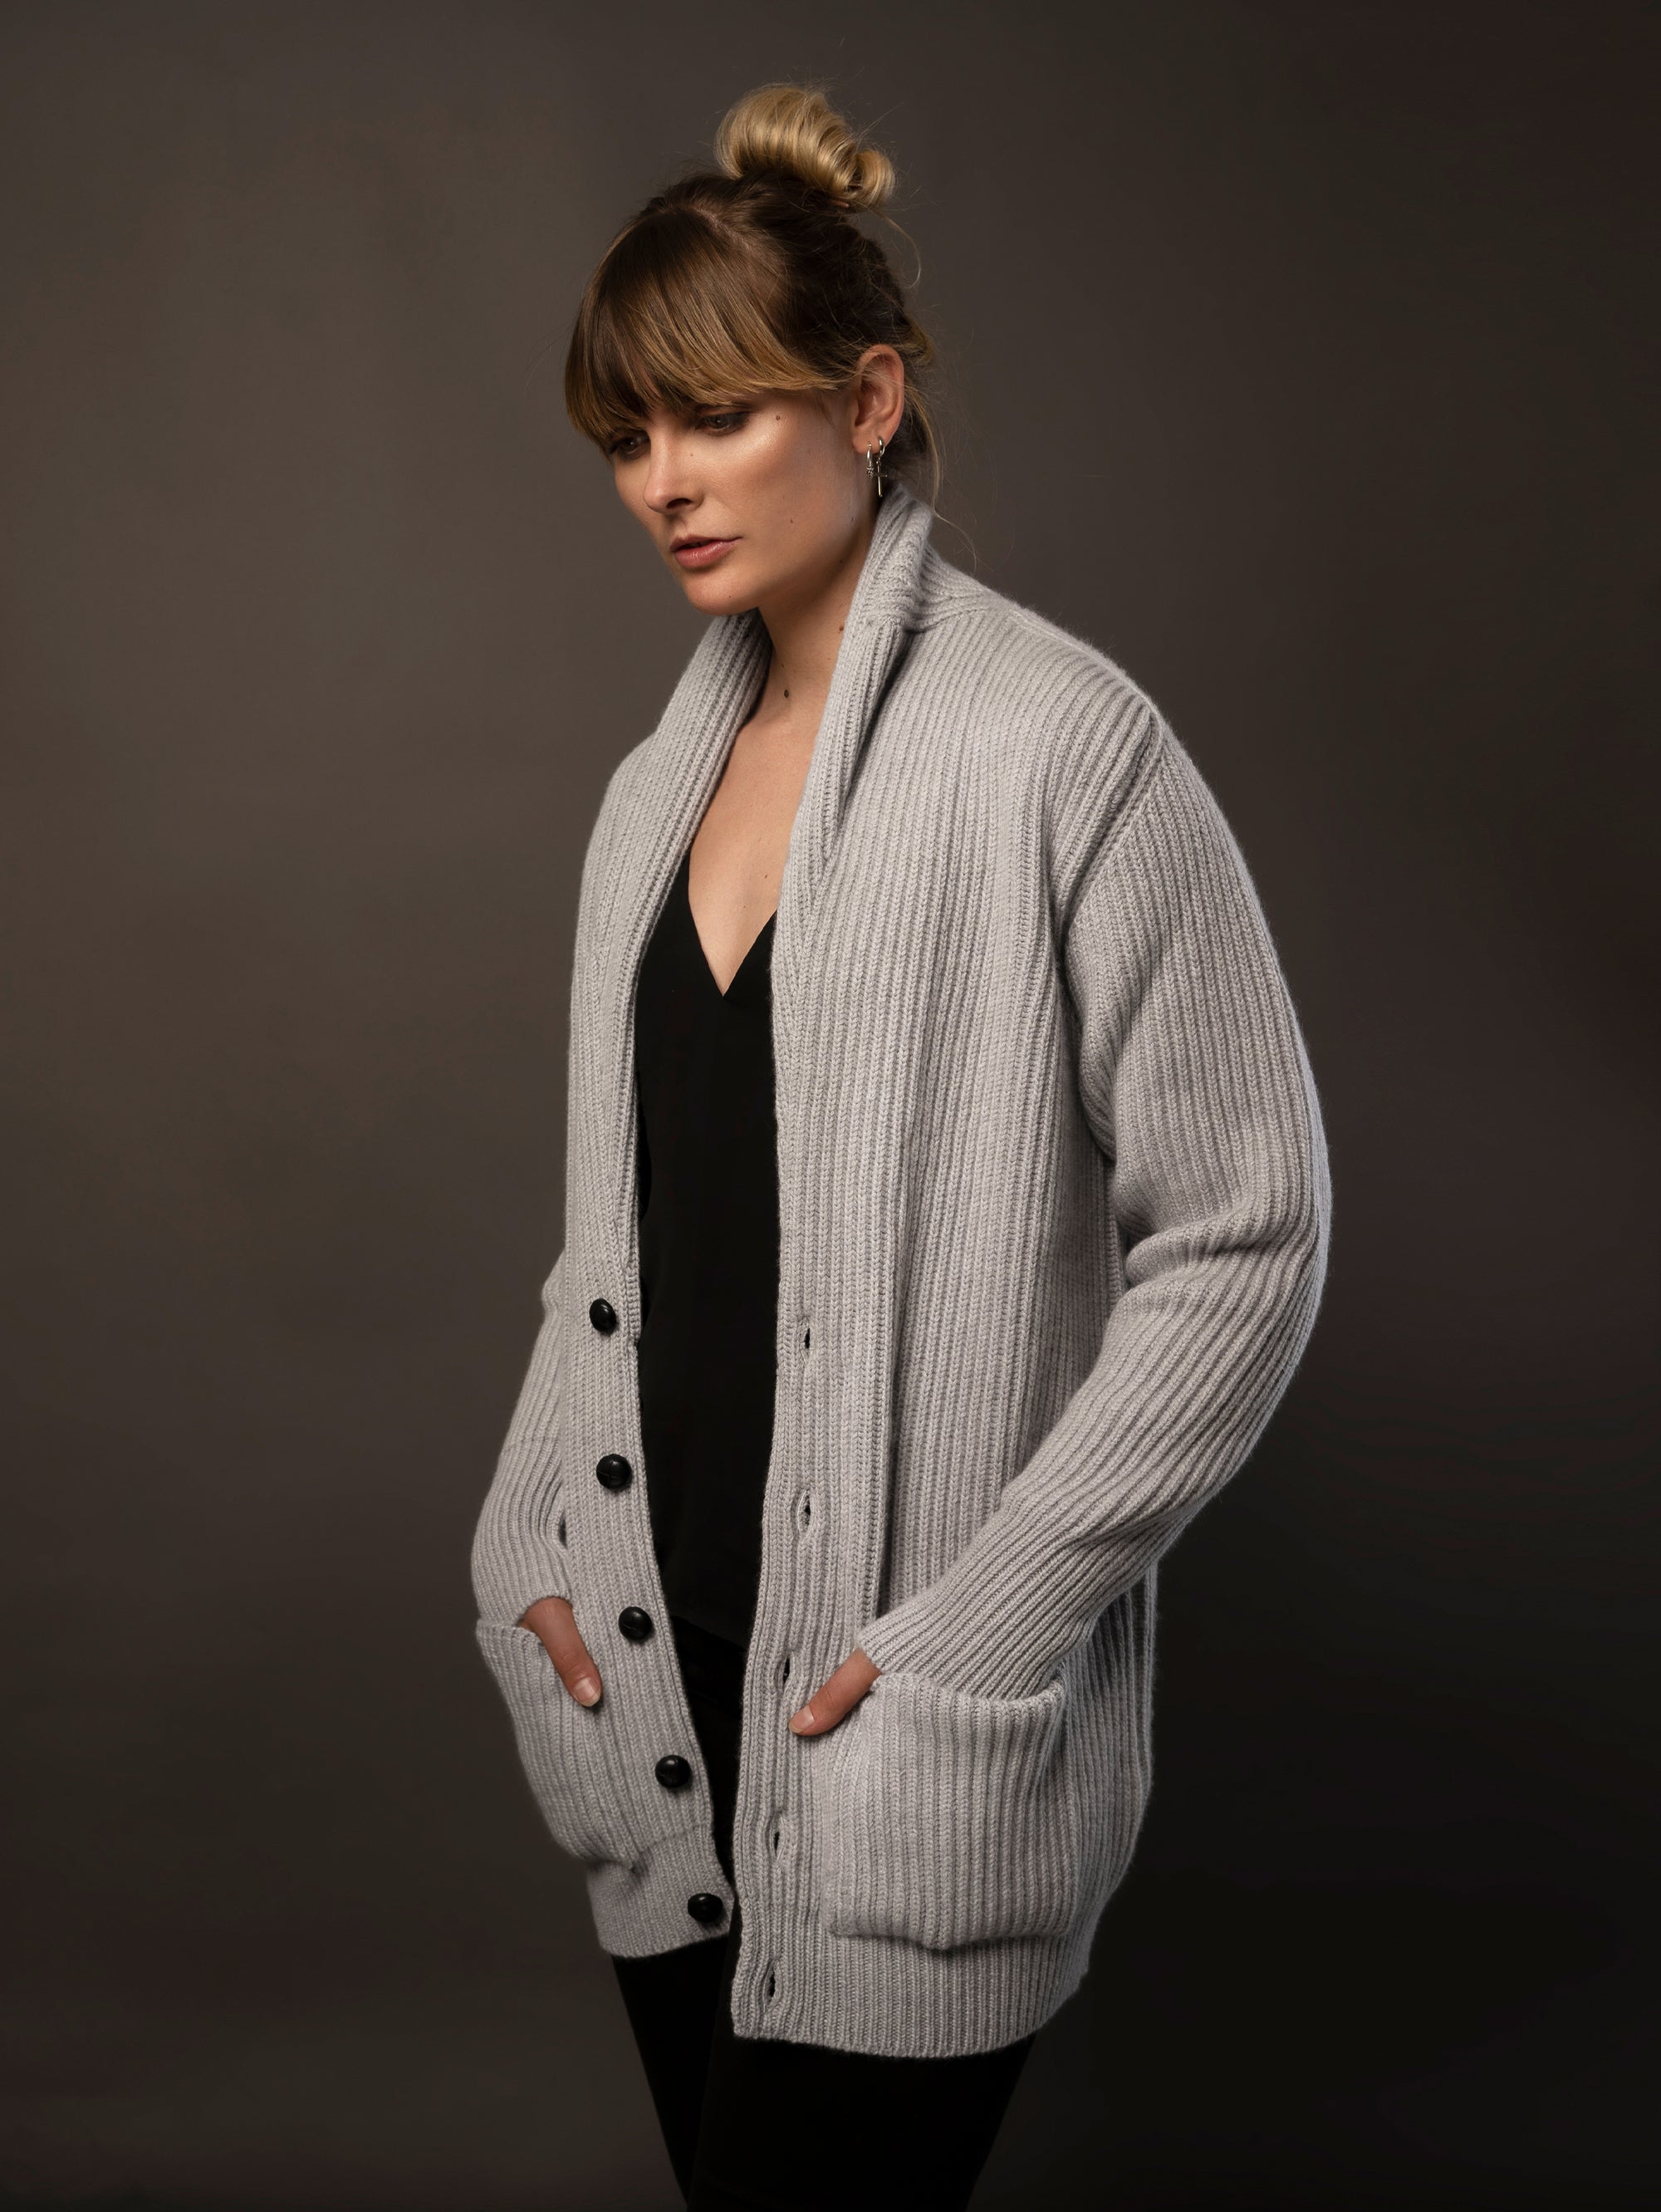 Ladies Cashmere Shawl Cardigan in Light Grey. 100% cashmere handmade under the Royal Warrant in the UK. This is Cashmere at it's finest. 